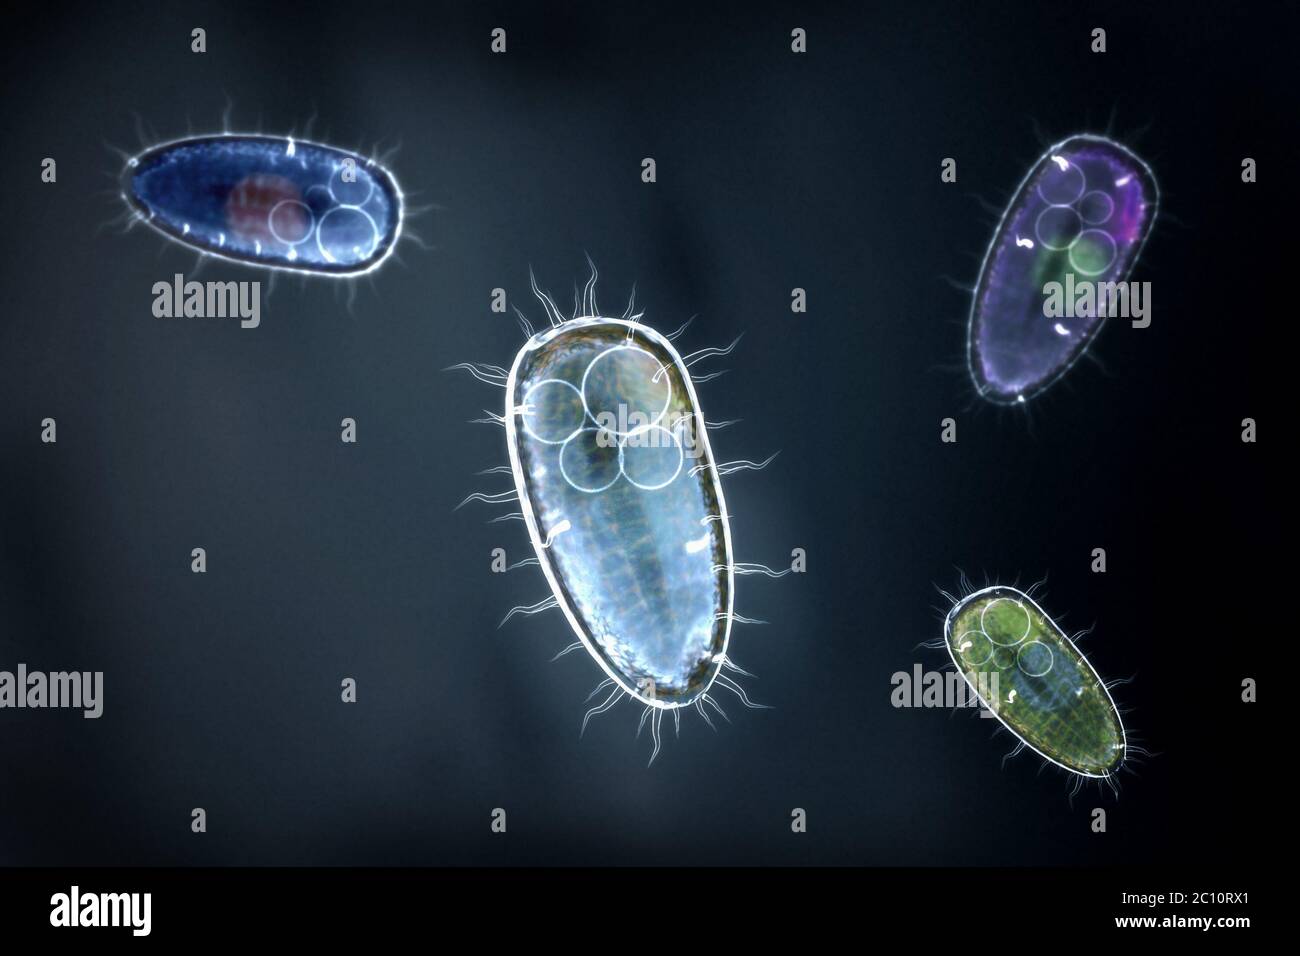 Four transparent and colorful protozoons or unicellular organism on an dark blue background. Stock Photo